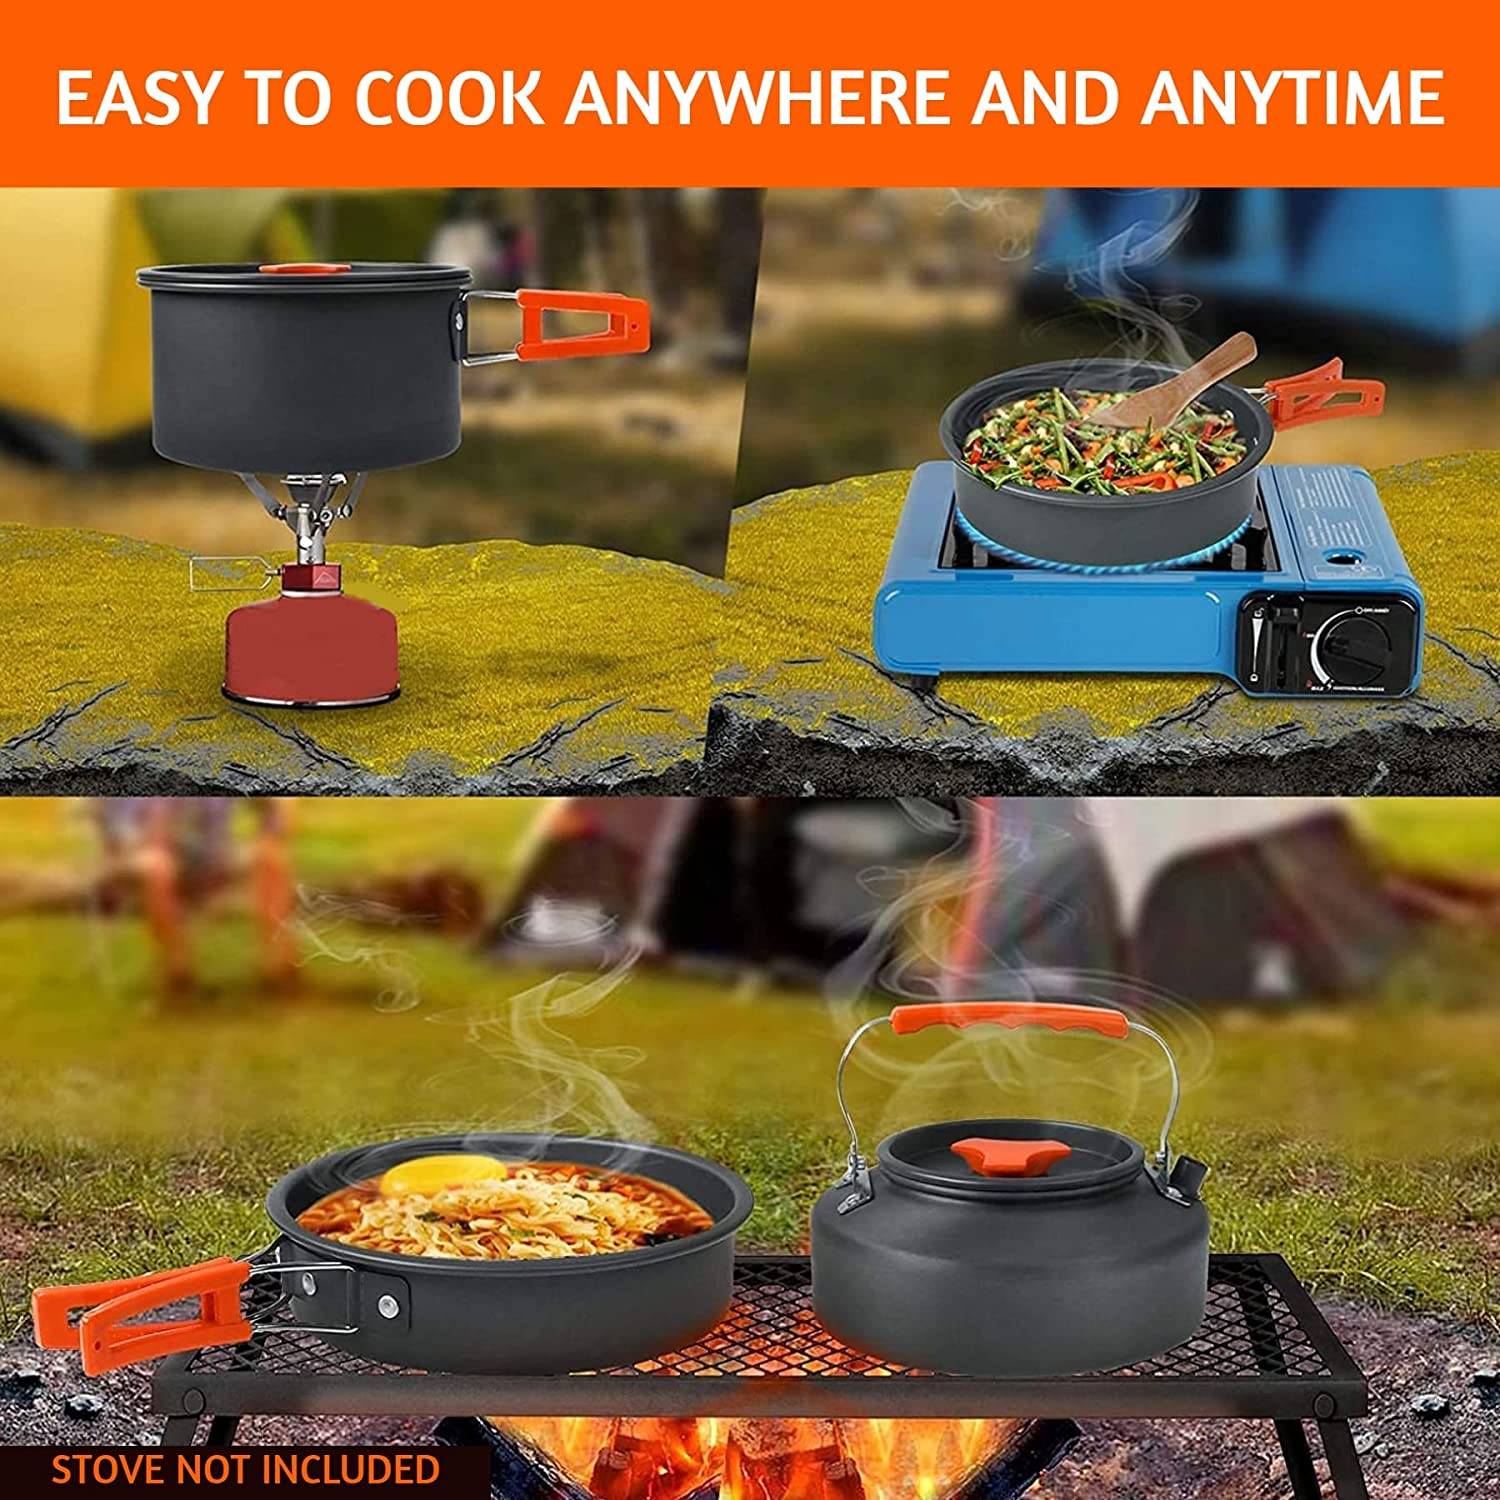 Nasmodo 10pcs Camping Cooking Set cookware Mess kit Outdoor Utensils, Portable Trekking Cooking Accessories for Camping Carabiner, Spoon, Bowl, Glass, Non-Stick pan